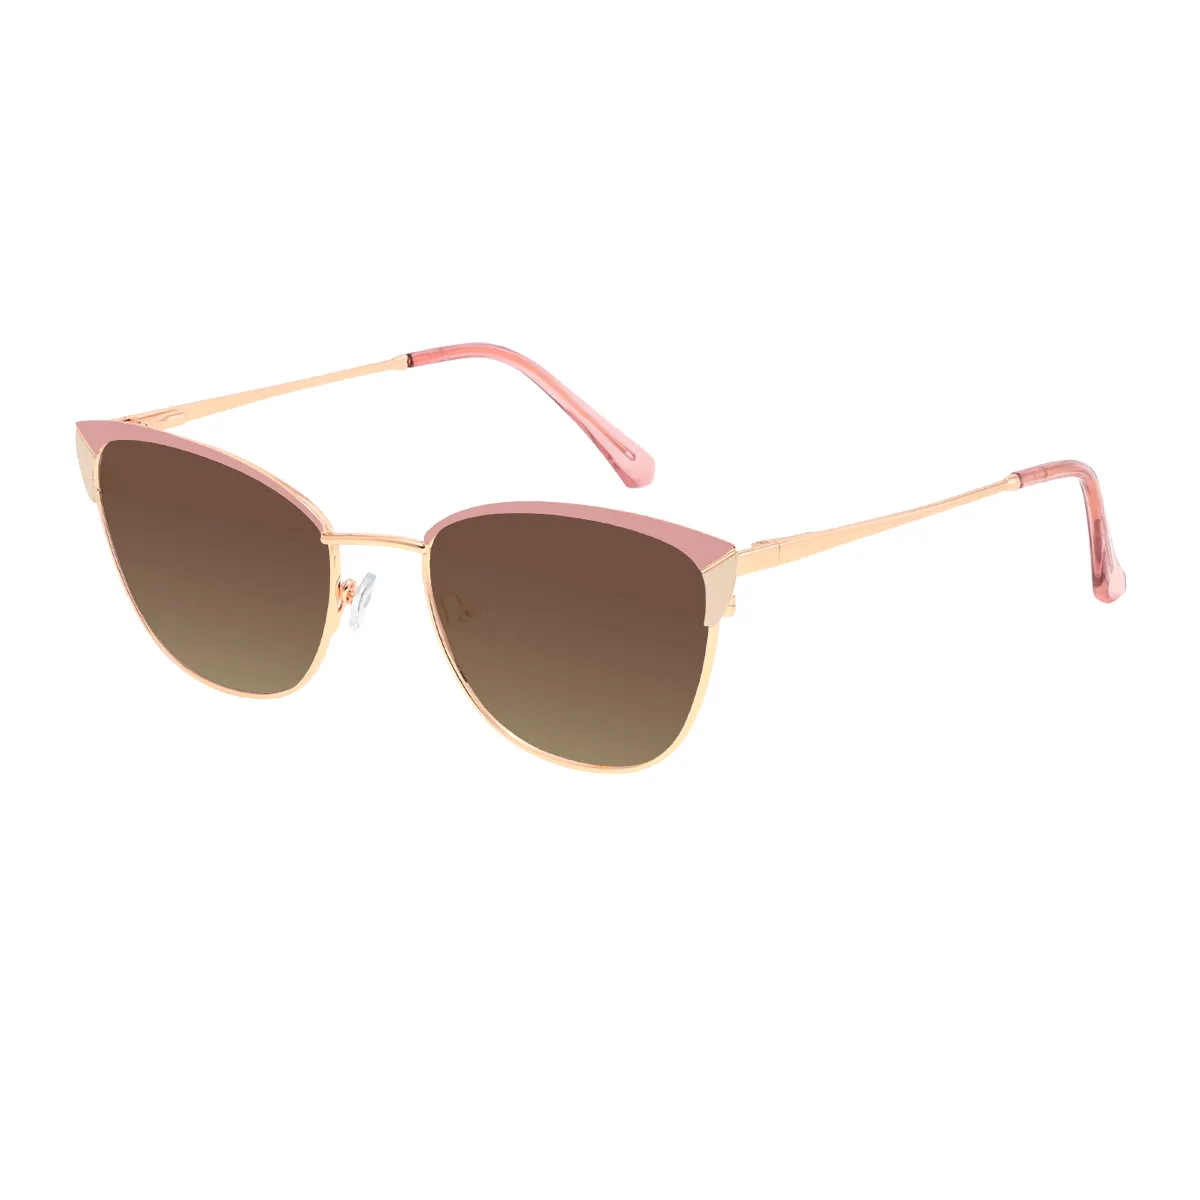 Anstey - Browline Pink Sunglasses for Women